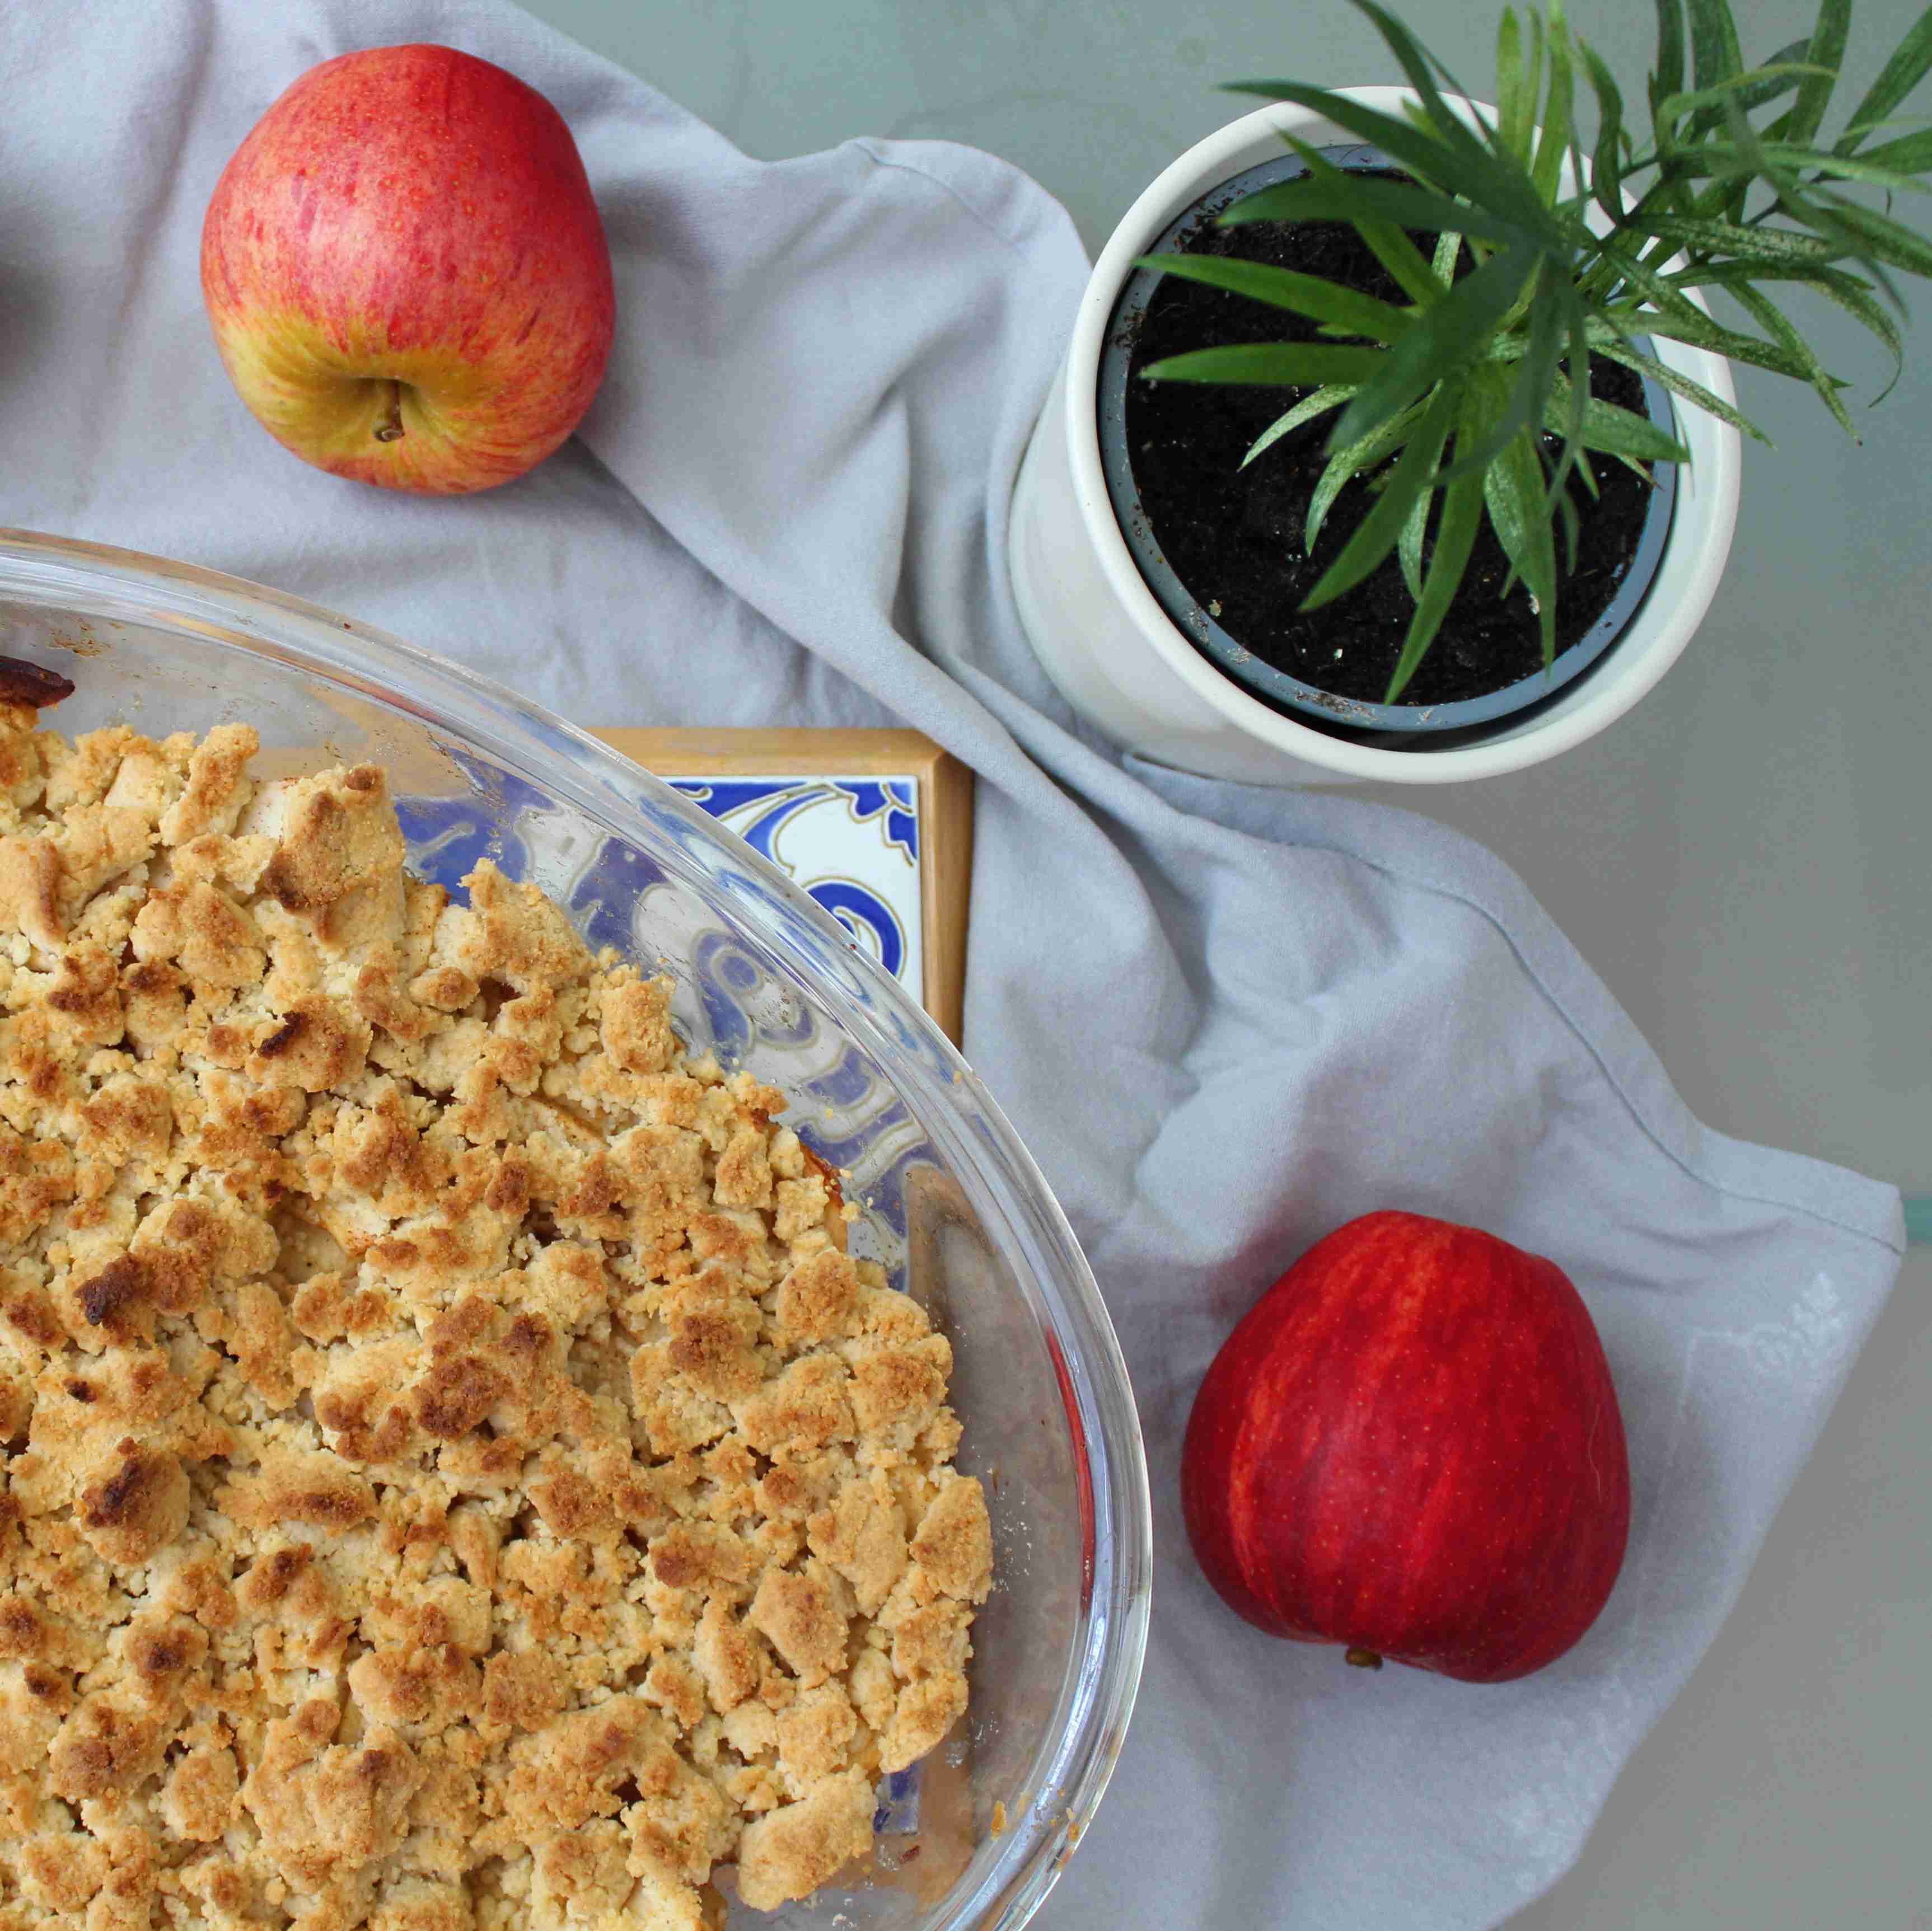 what is apple crumble made of